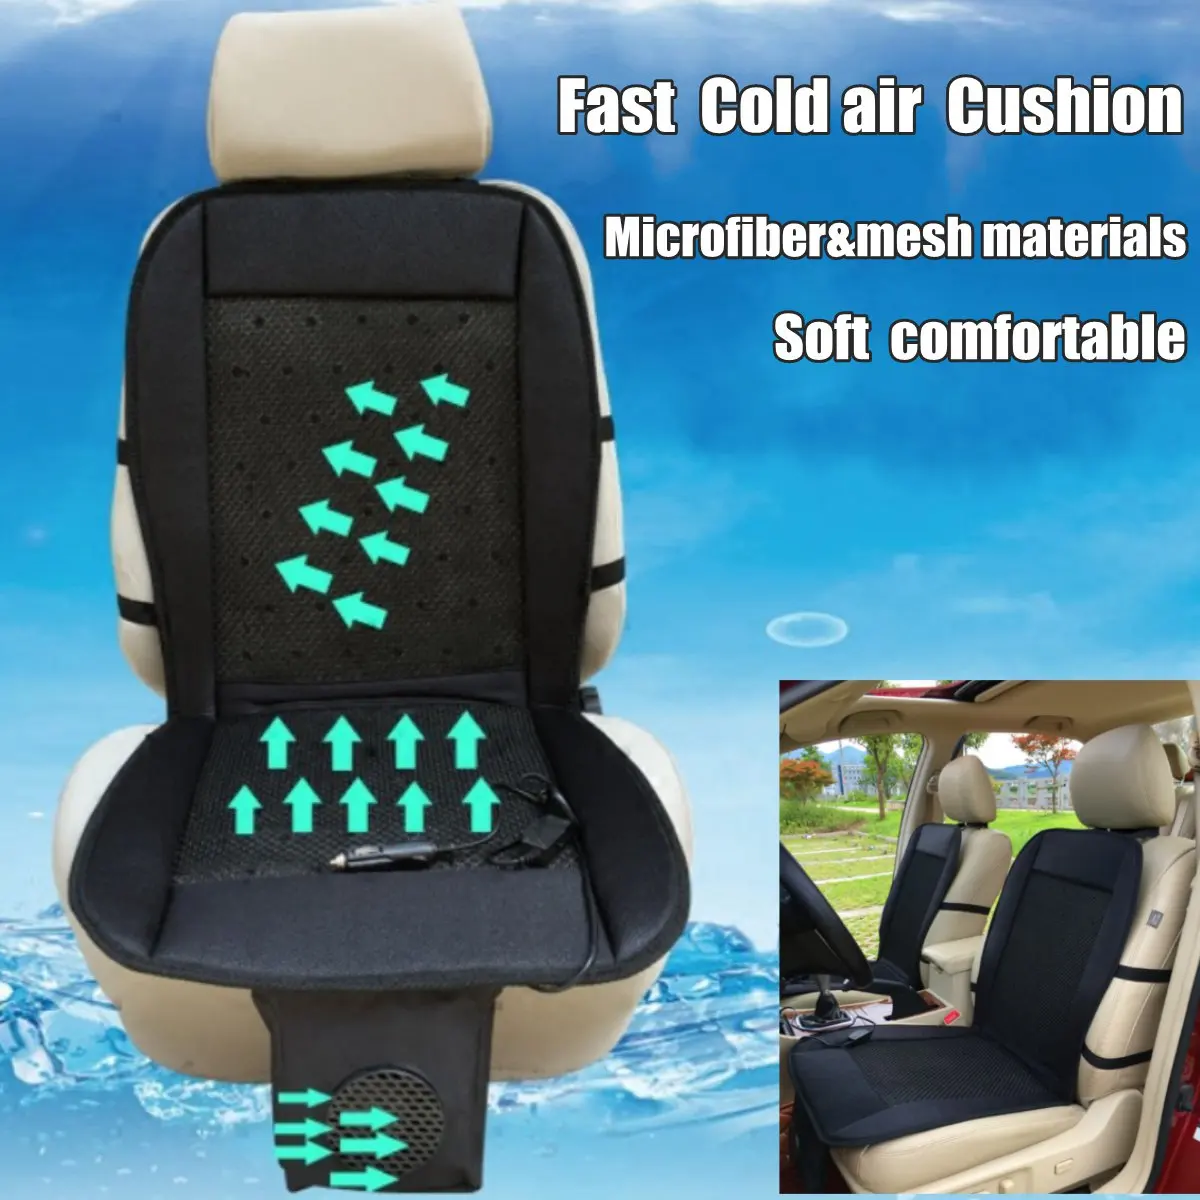 

DC 12V Summer cool cushion w/cigarette lighter controller with fan blowing cool summer ventilation cushion seat cushion car seat